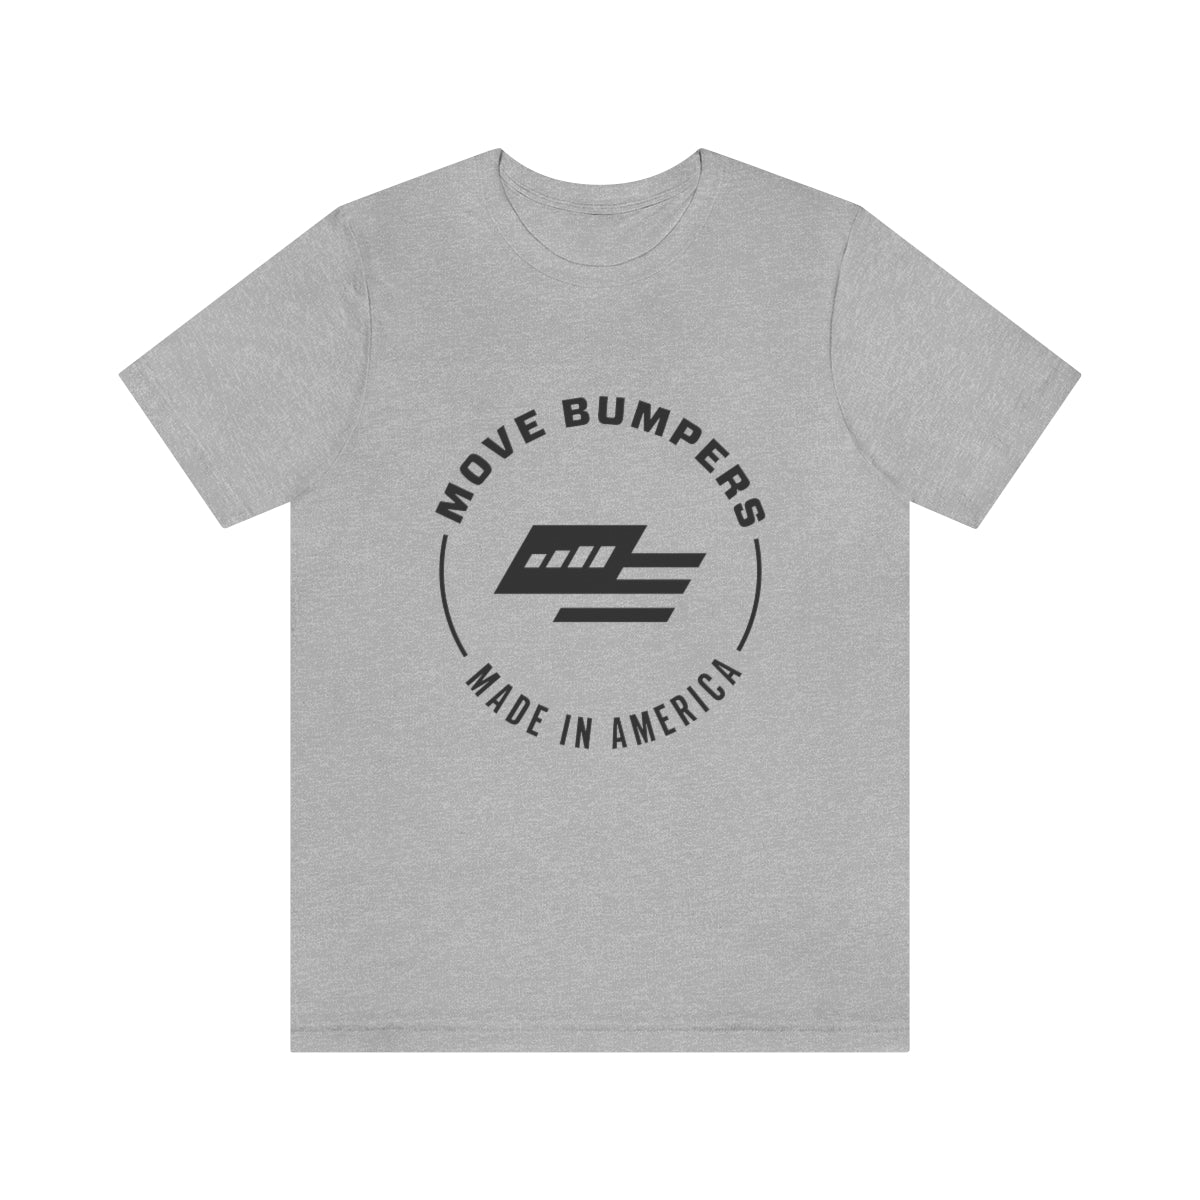 MOVE Bumpers - T-shirt Athletic Heather